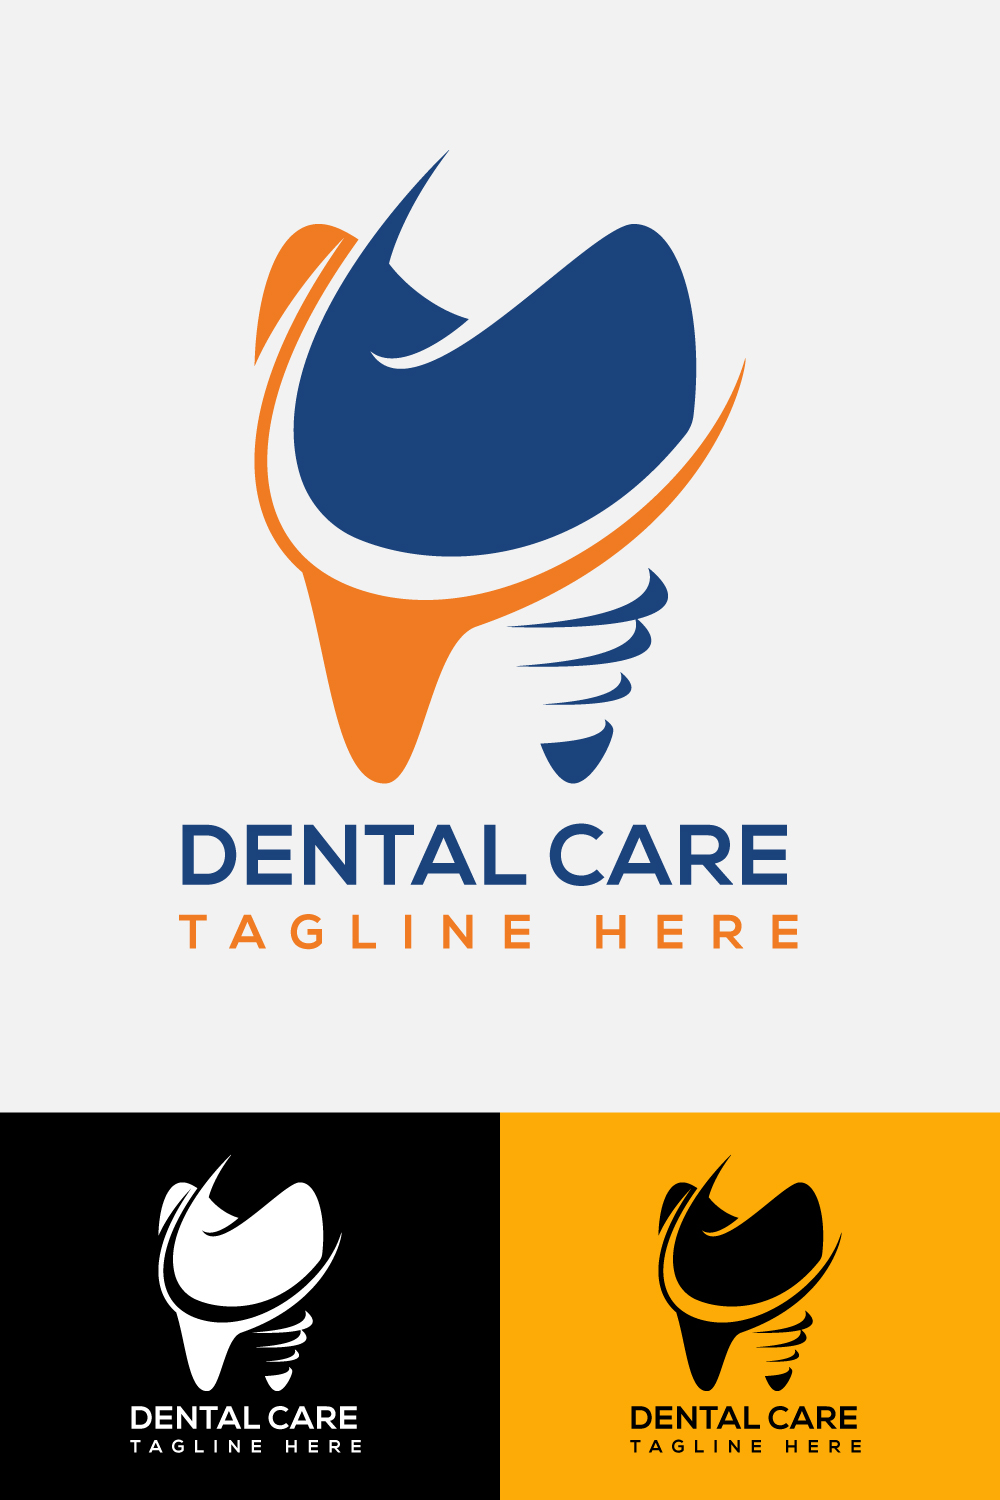 An image pack of exquisite tooth shape logos.